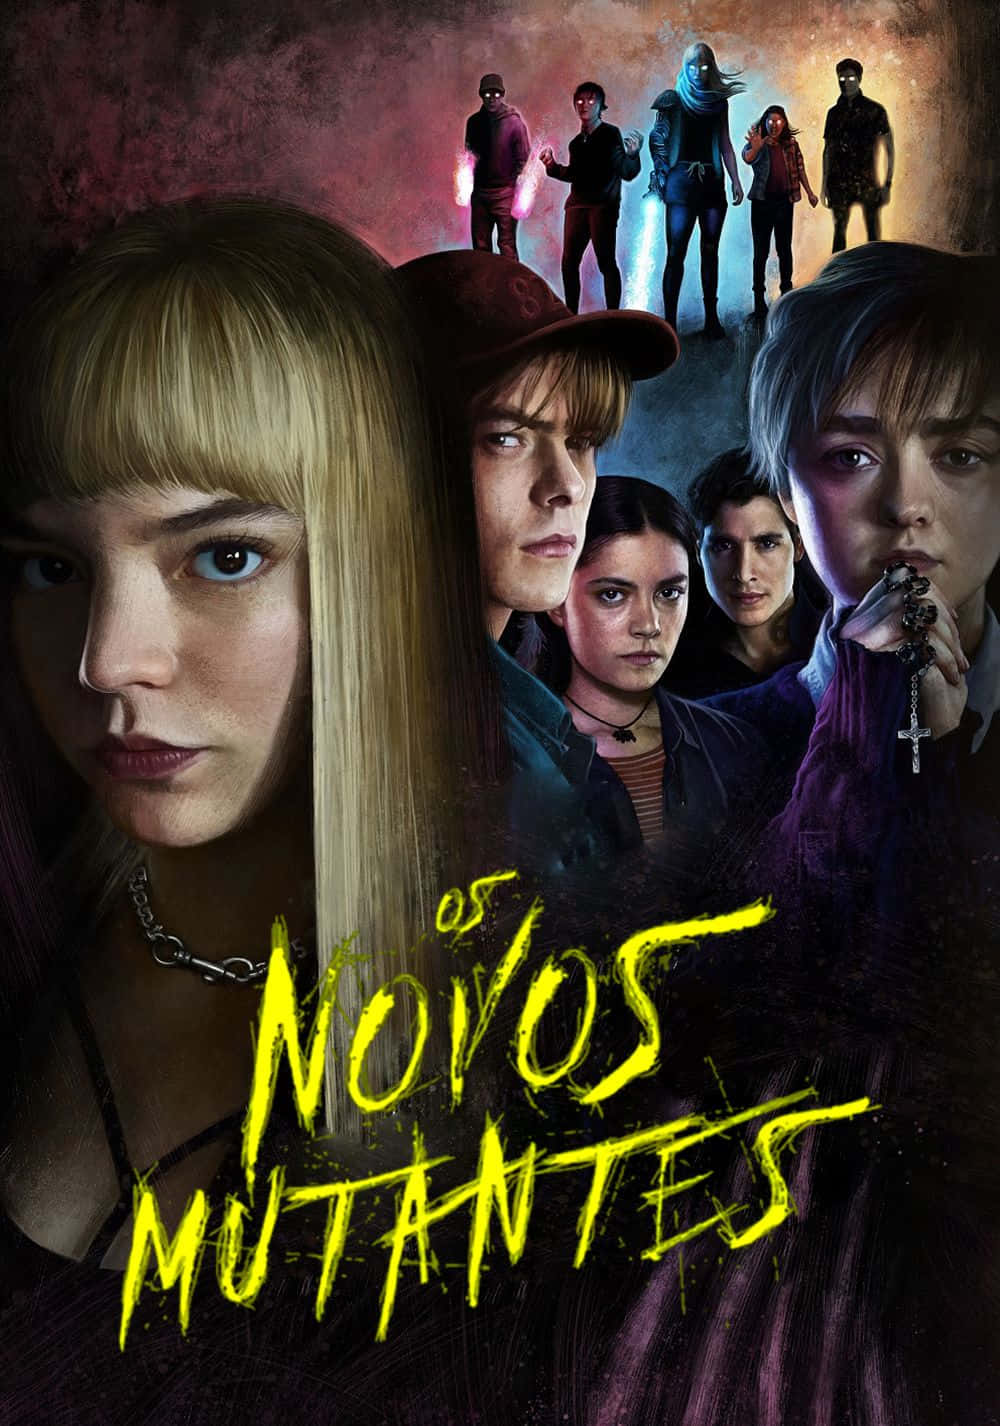 Action-packed New Mutants Movie Poster Wallpaper